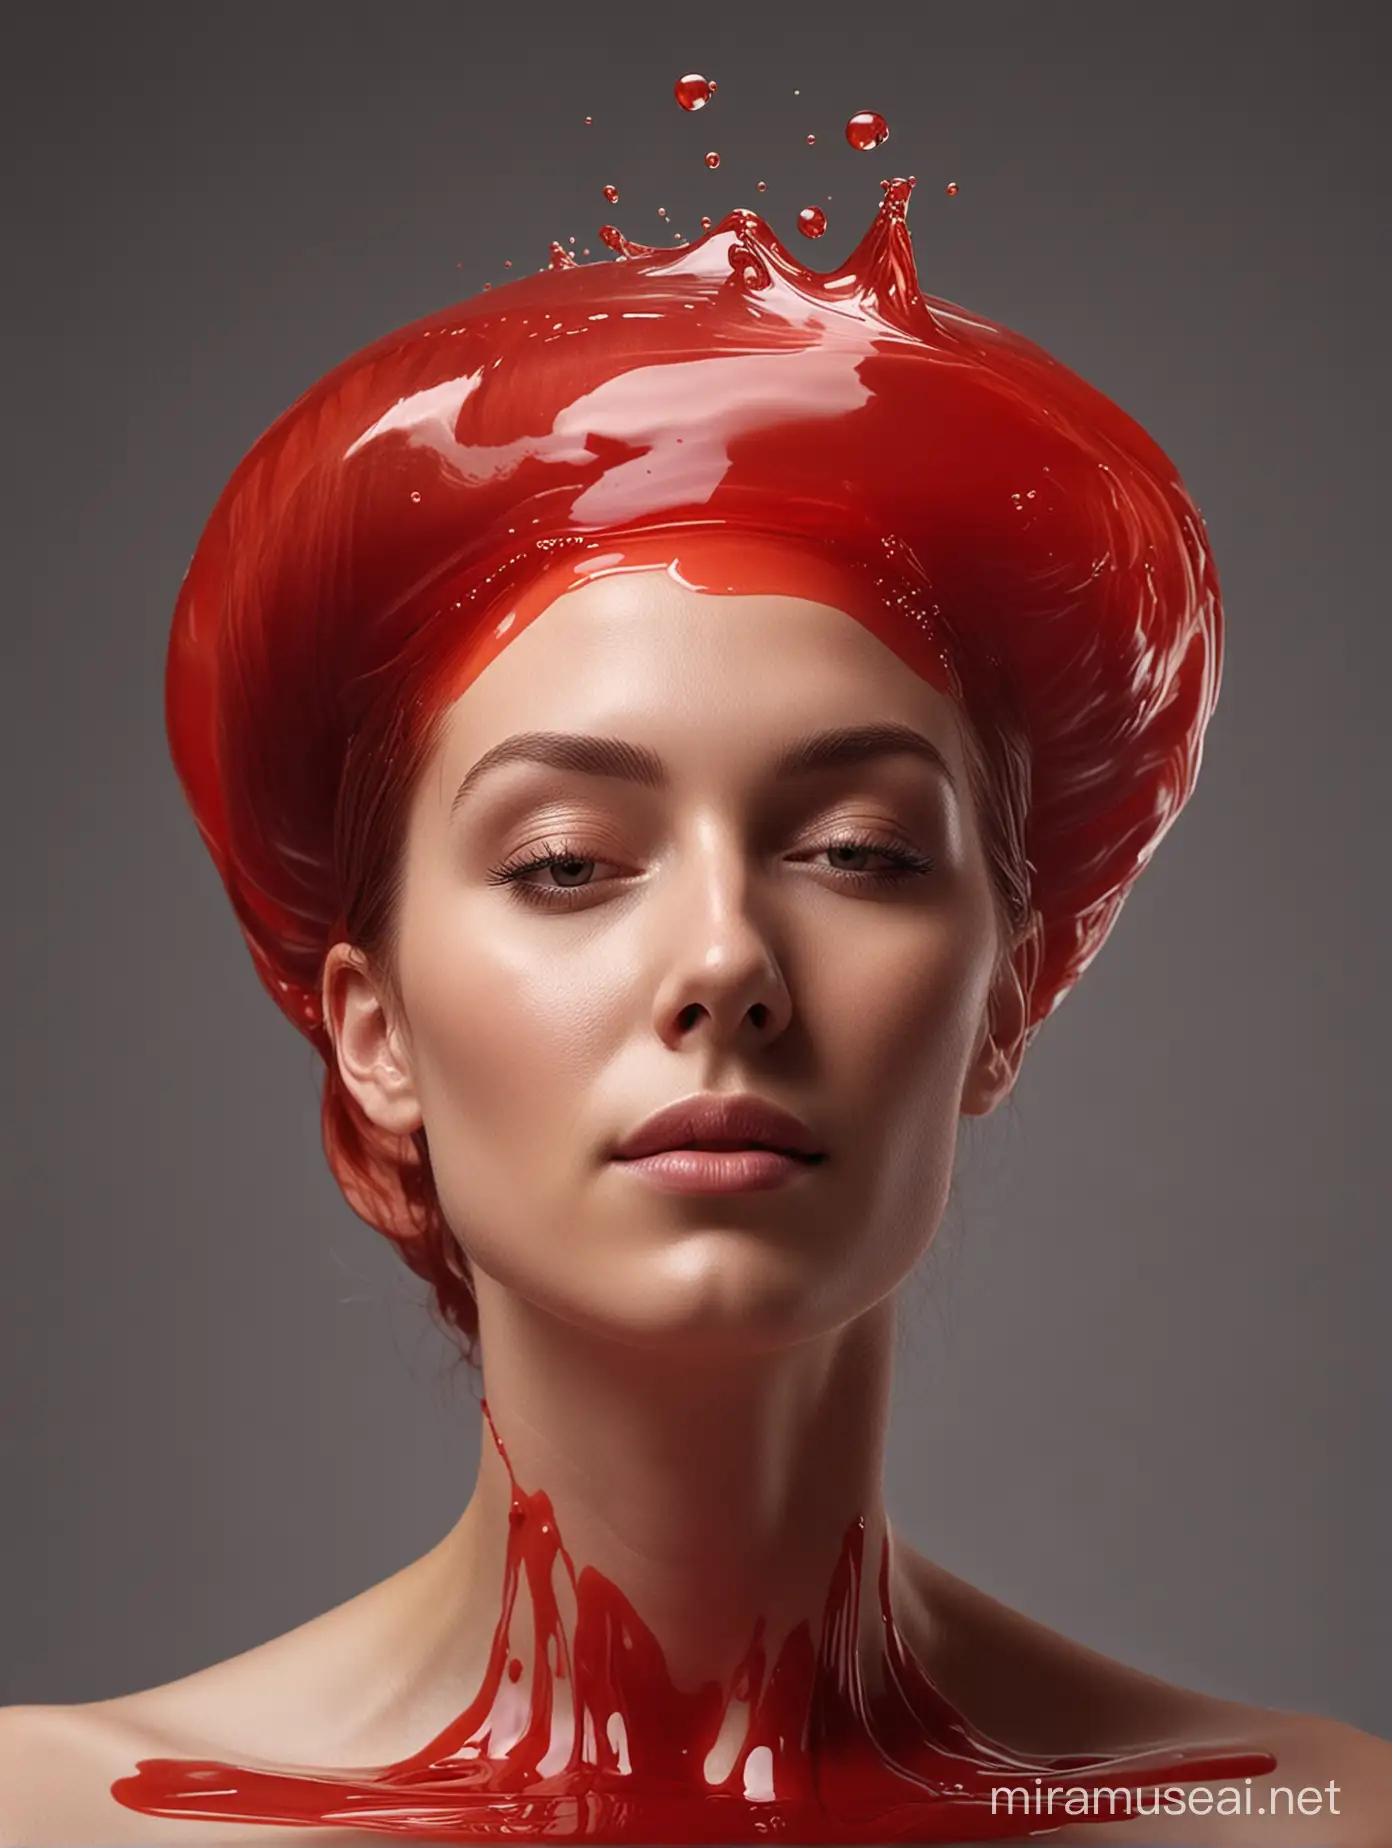 Surreal Floating Womans Head in Red Liquid